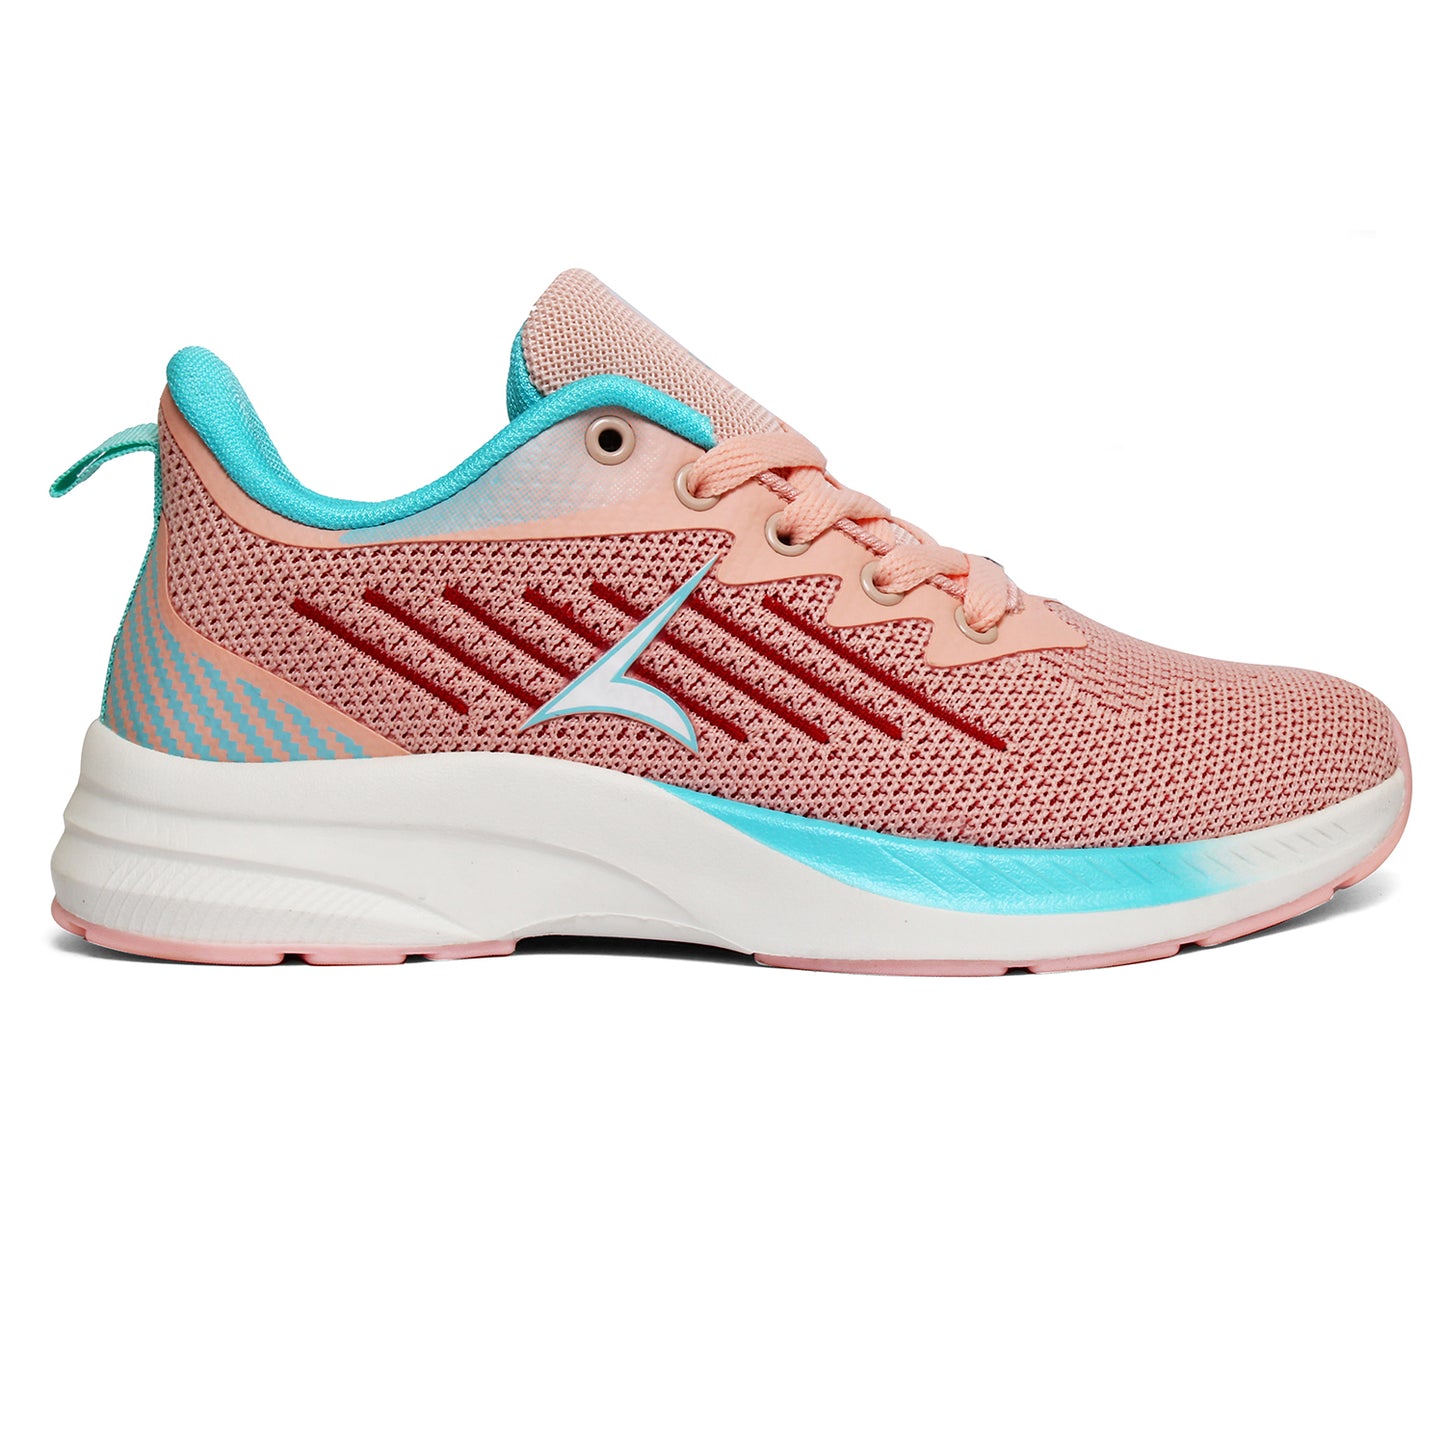 Tracer India Vibe-L-2305 Women's Sneakers Pink